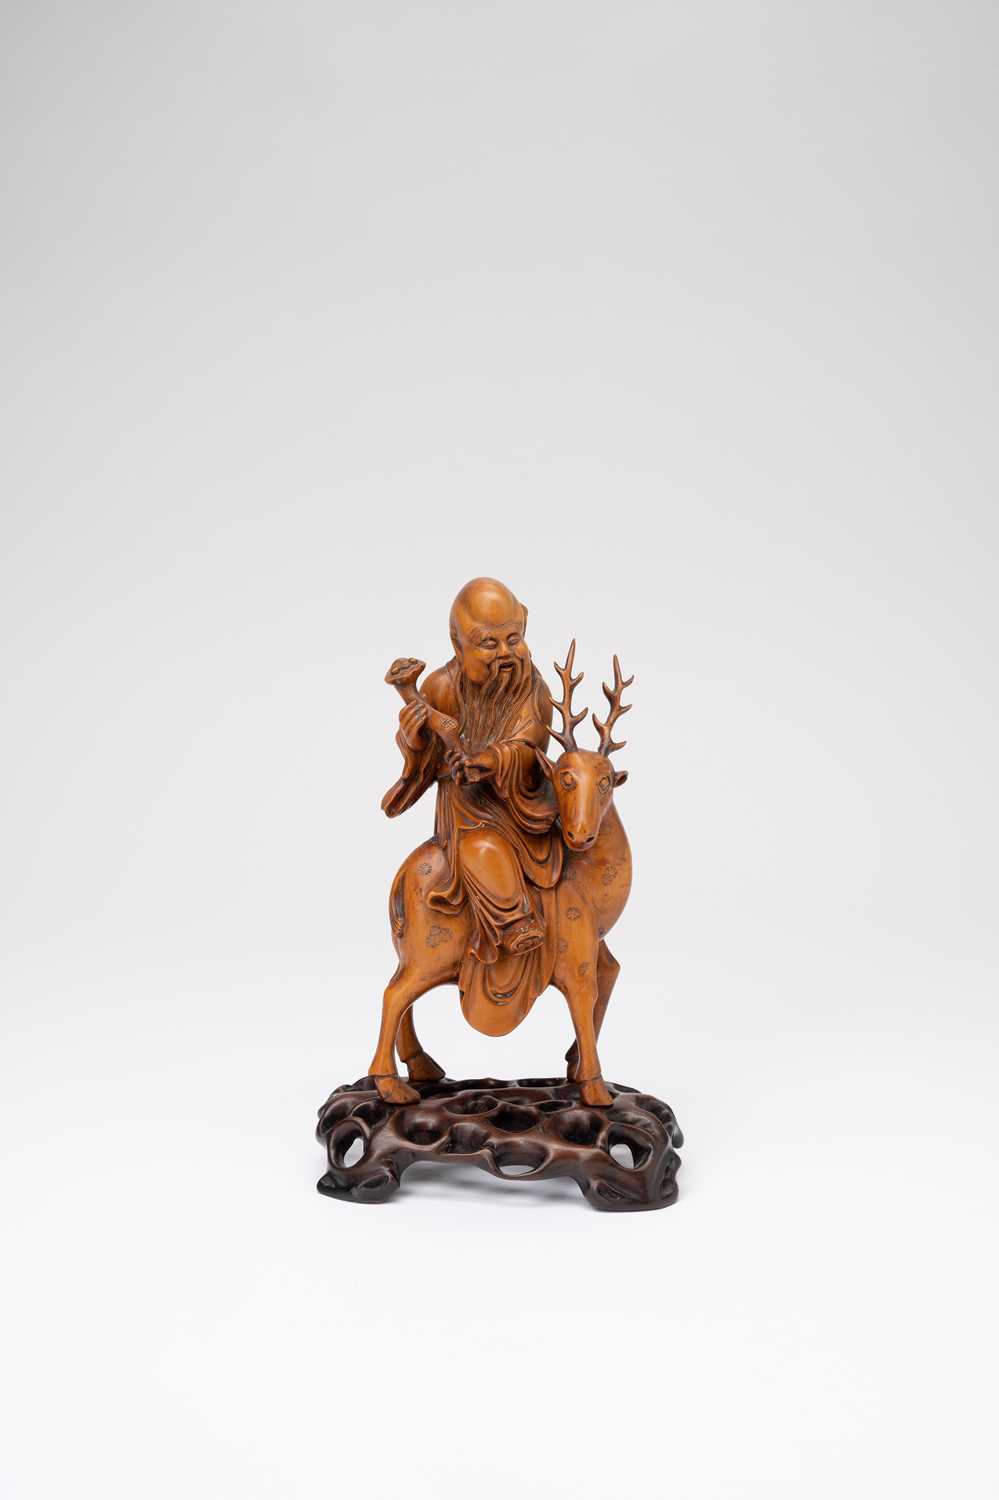 A CHINESE BOXWOOD CARVING OF SHOULAO RIDING A SPOTTY DEERLATE QING DYNASTYThe God sits wearing